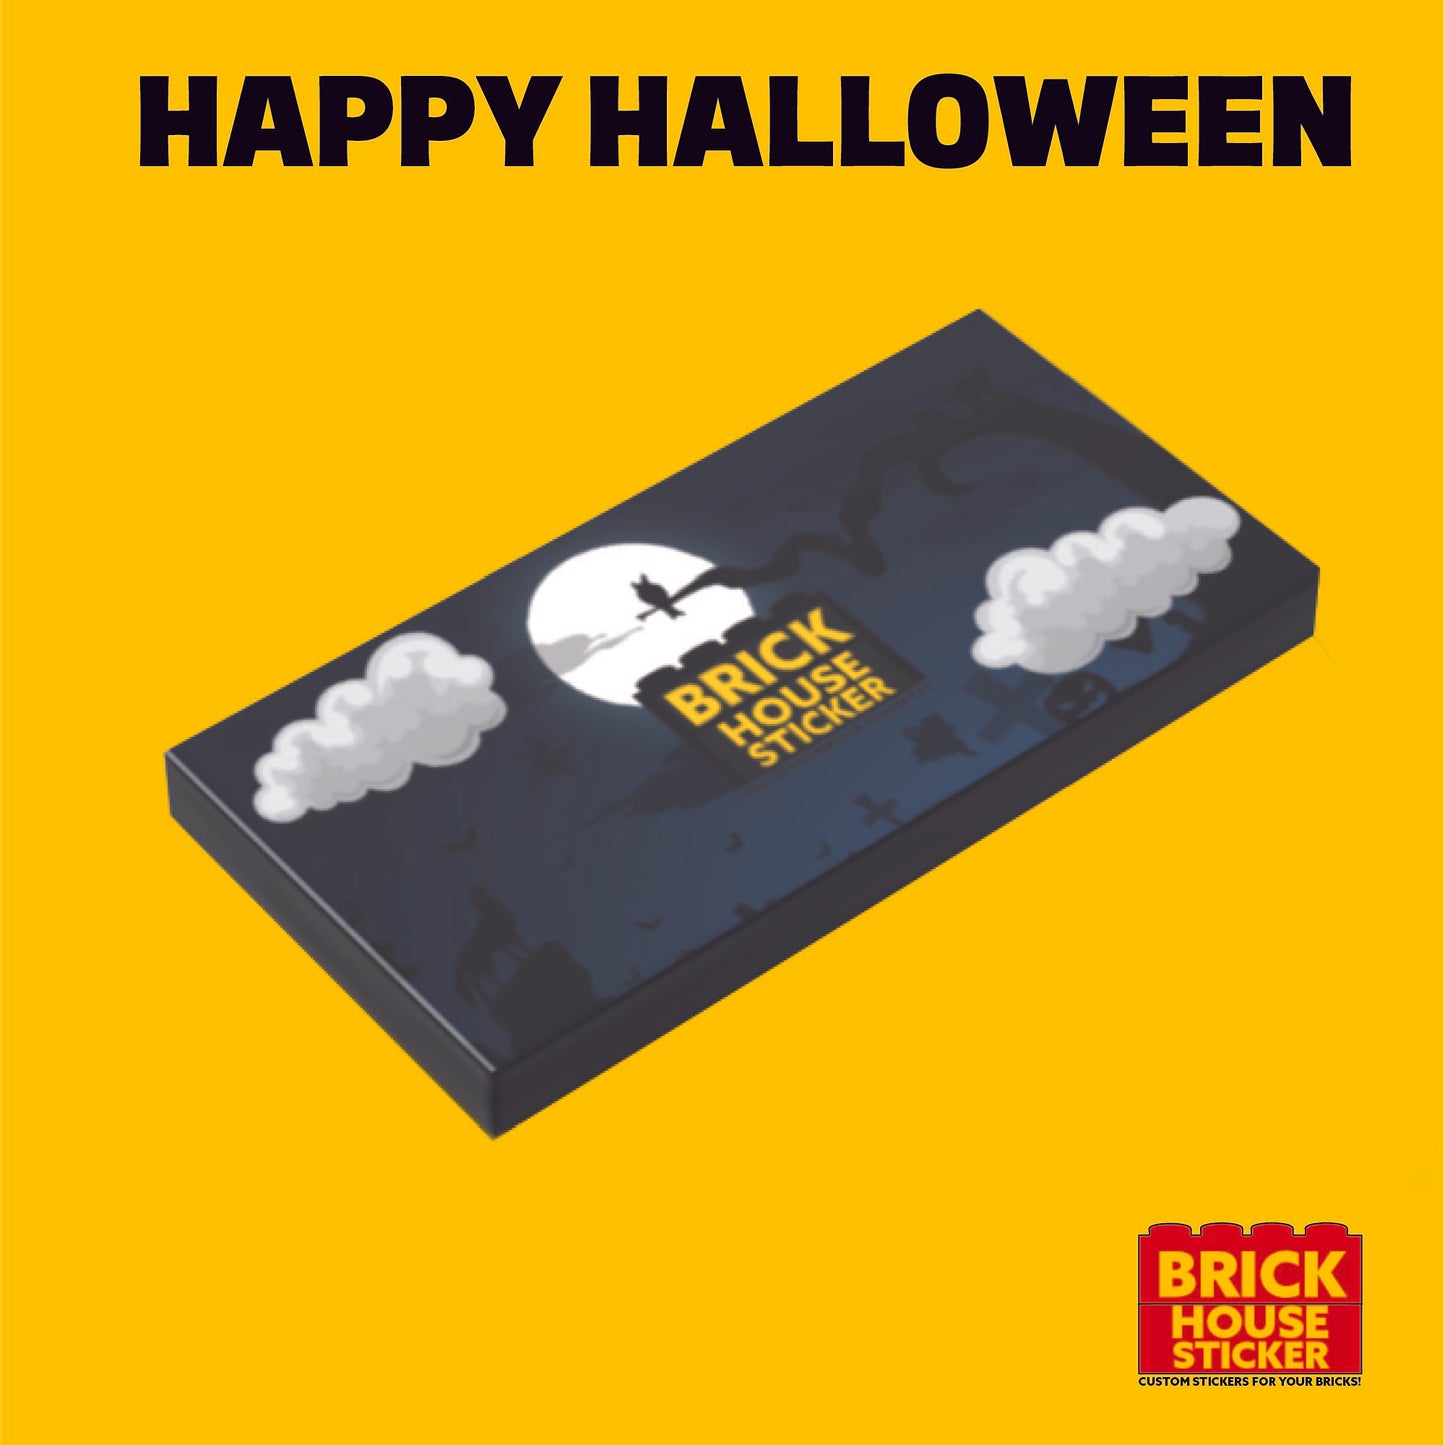 Happy Halloween Free sticker with selected purchase !